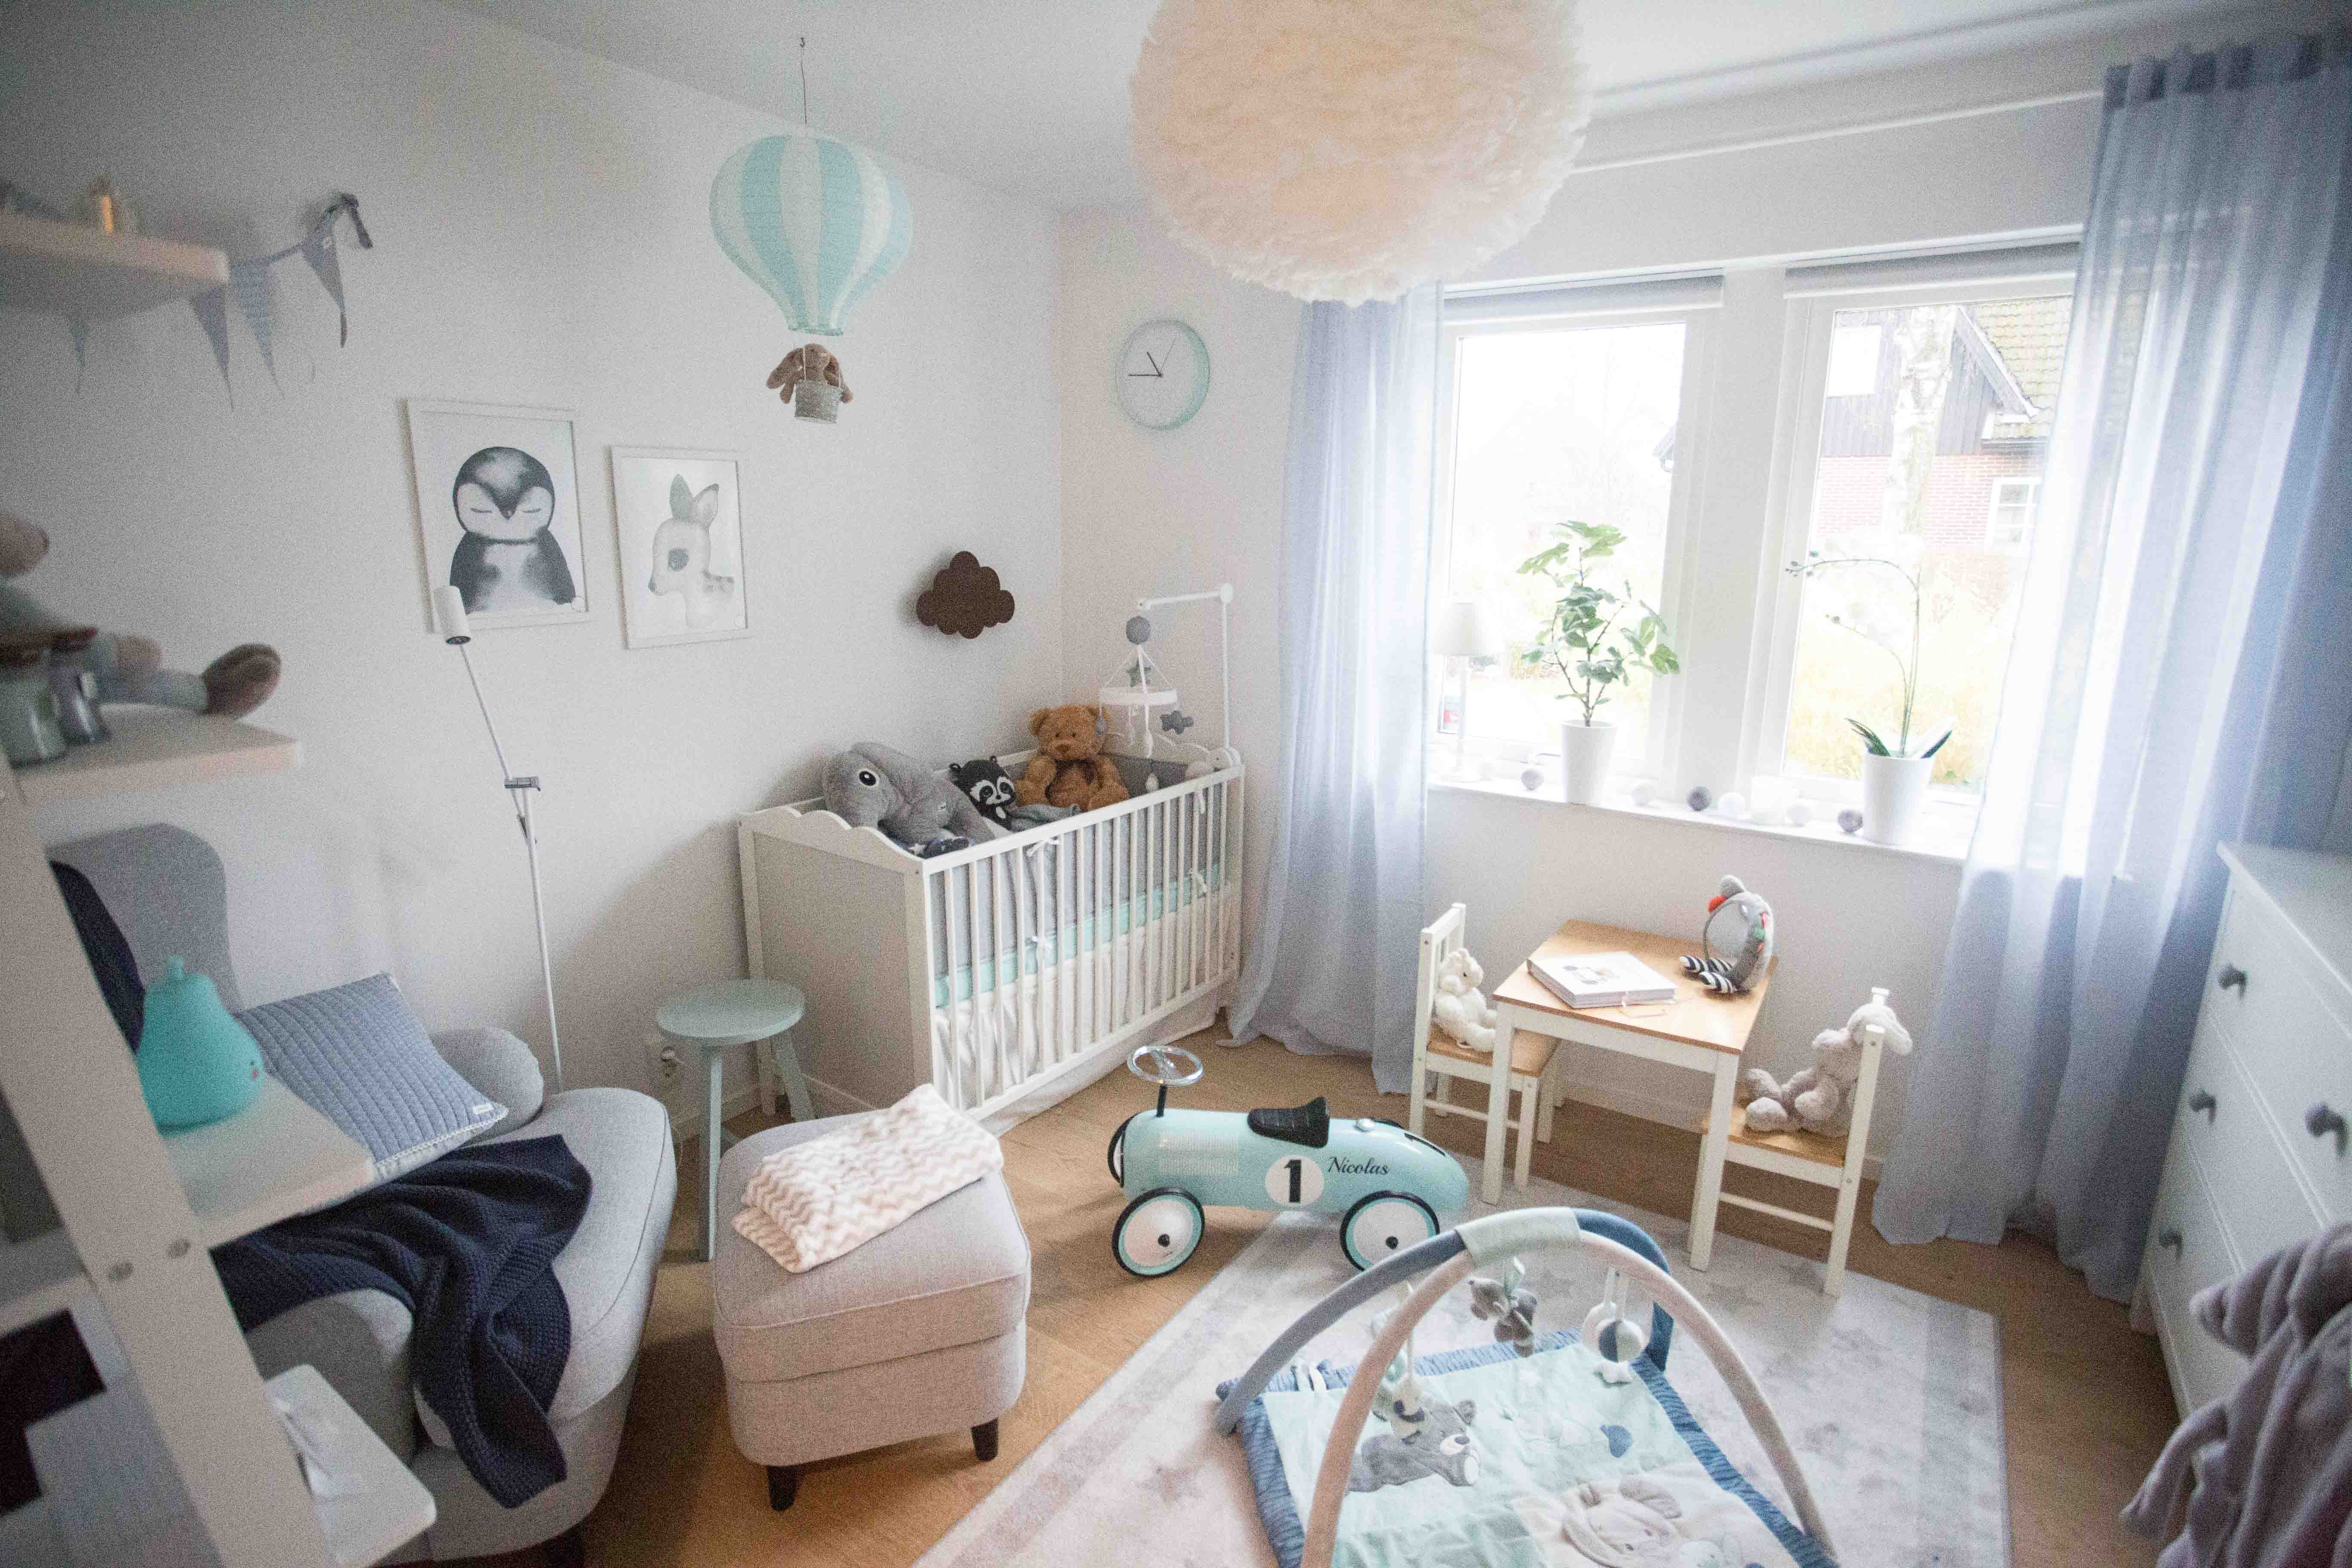 Baby room inspiration – Blue & turquoise for boys